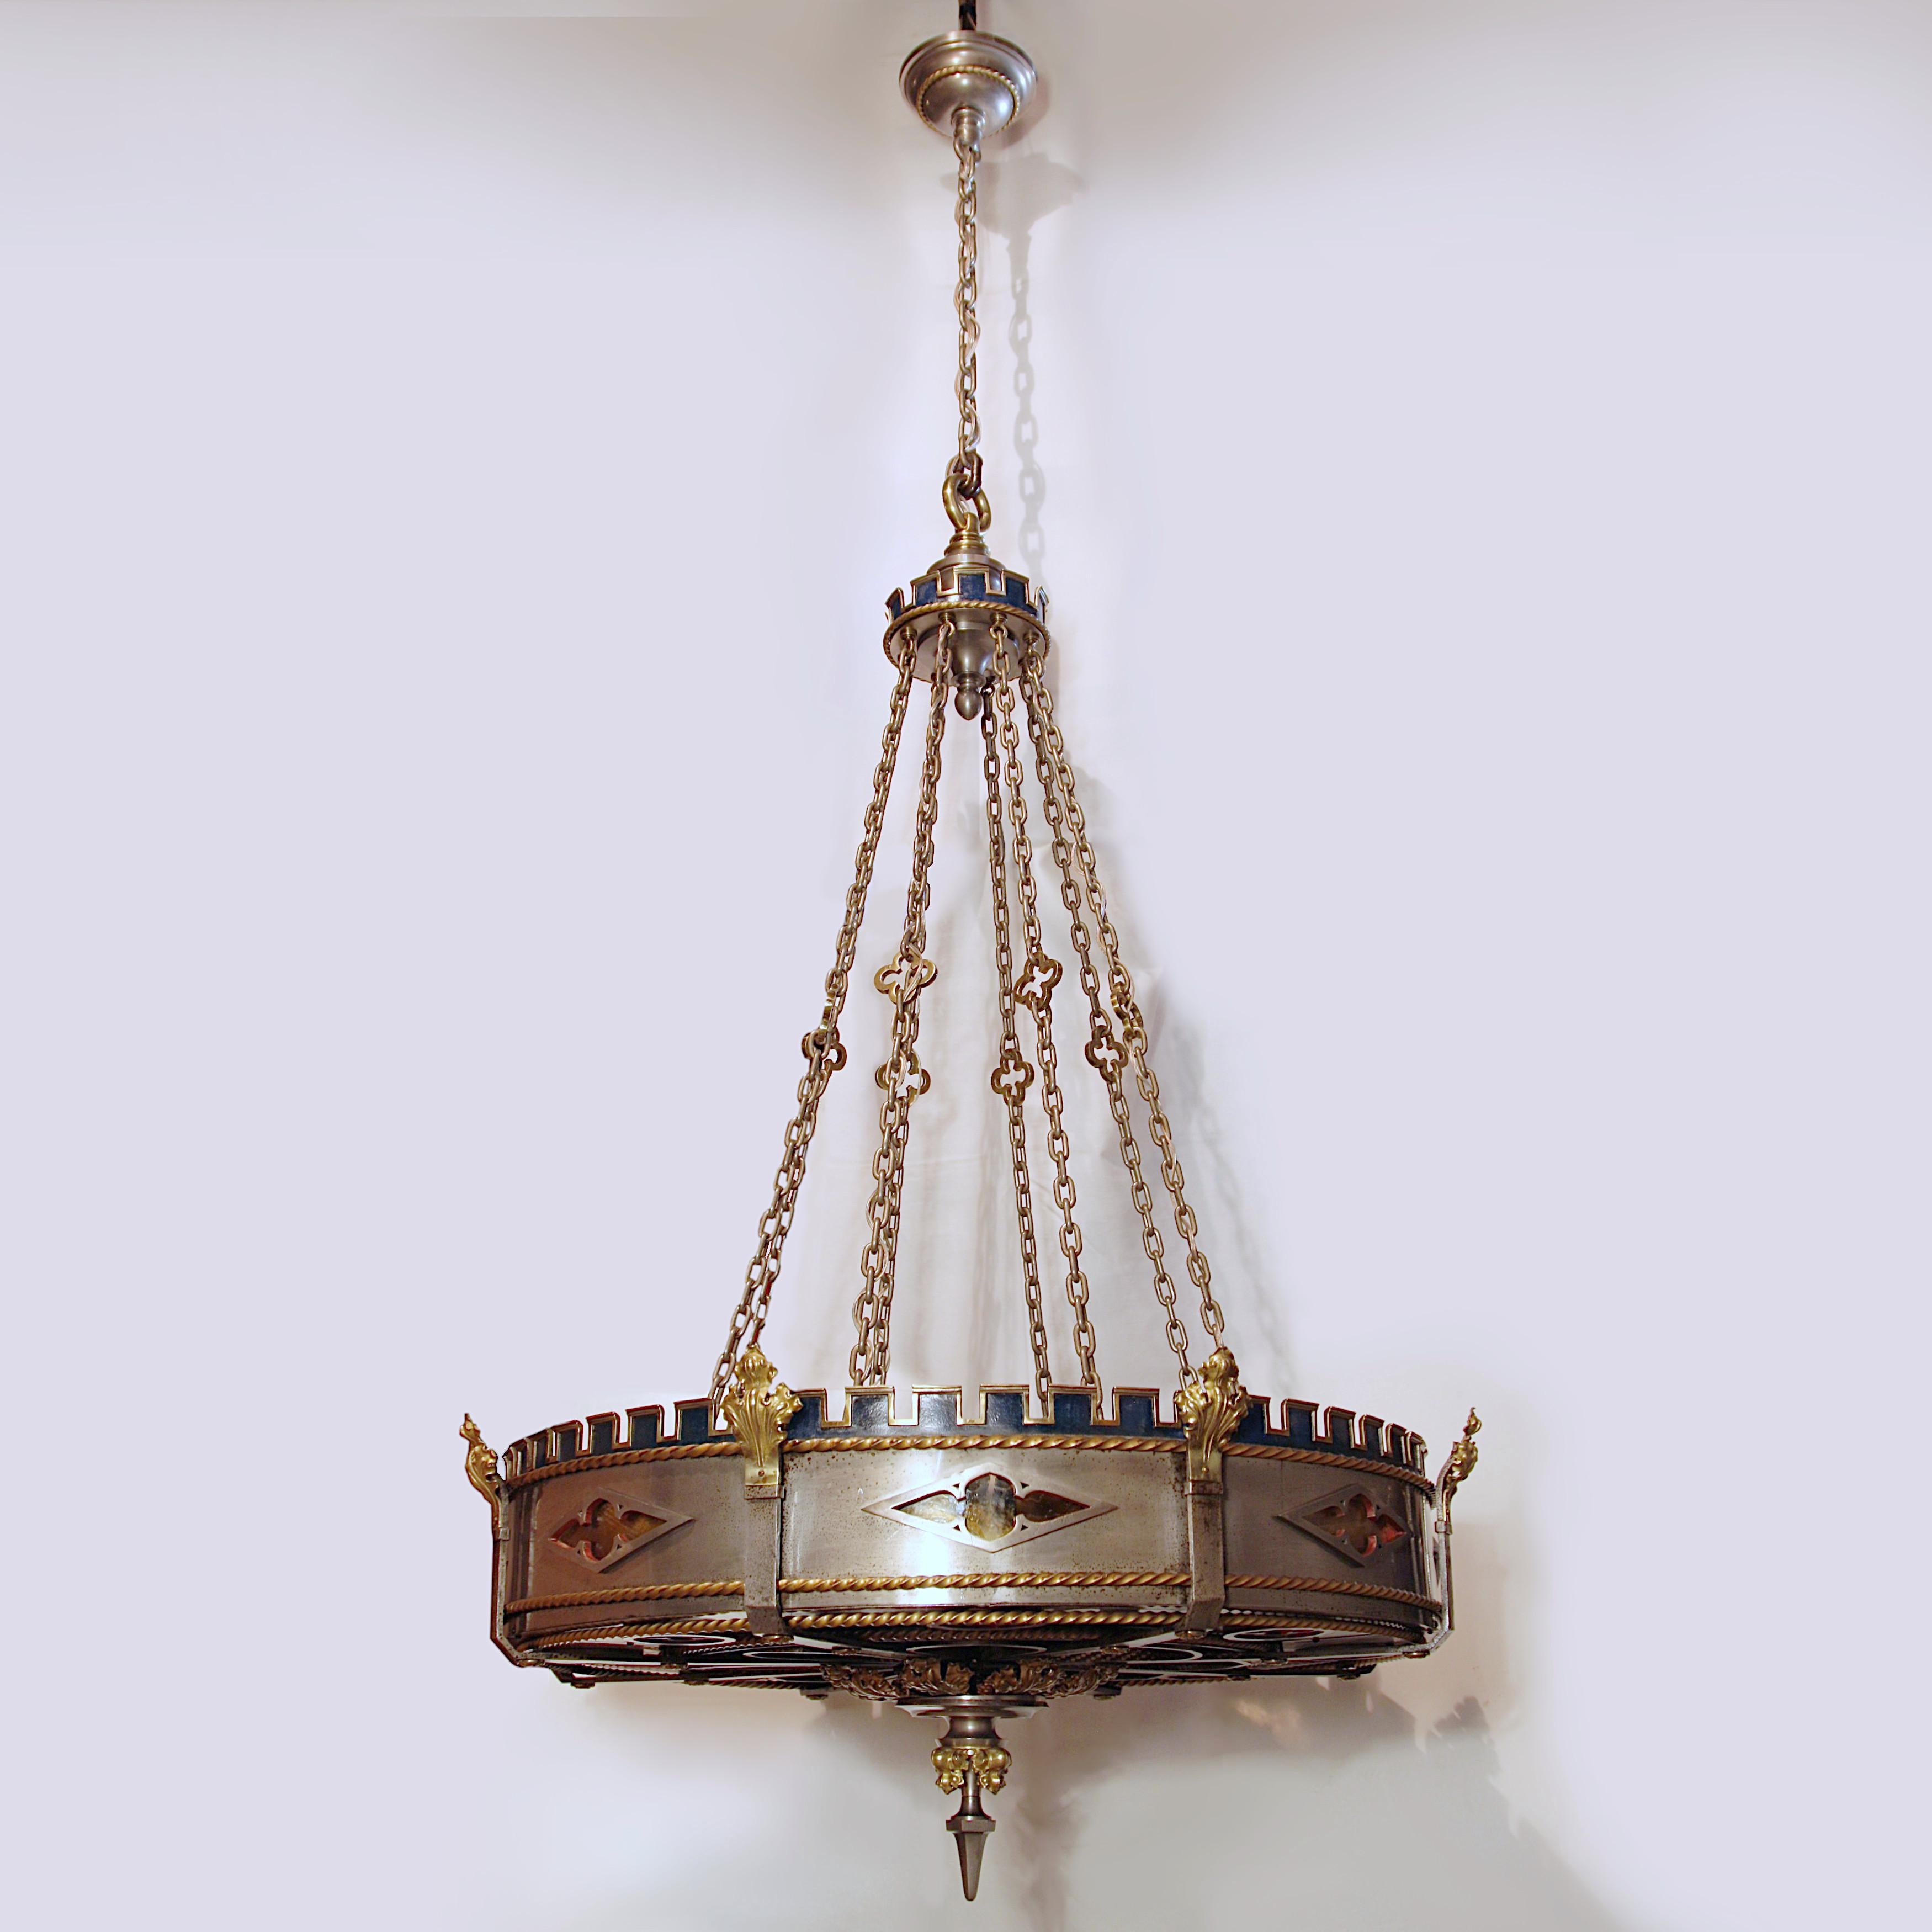 This Spectacular, custom-made chandelier is not only a work of art, but an astonishing piece of early 20th-Century American craftsmanship. Every part of this 500+ piece fixture is a solid piece of steel, iron, glass or brass!

Chandelier